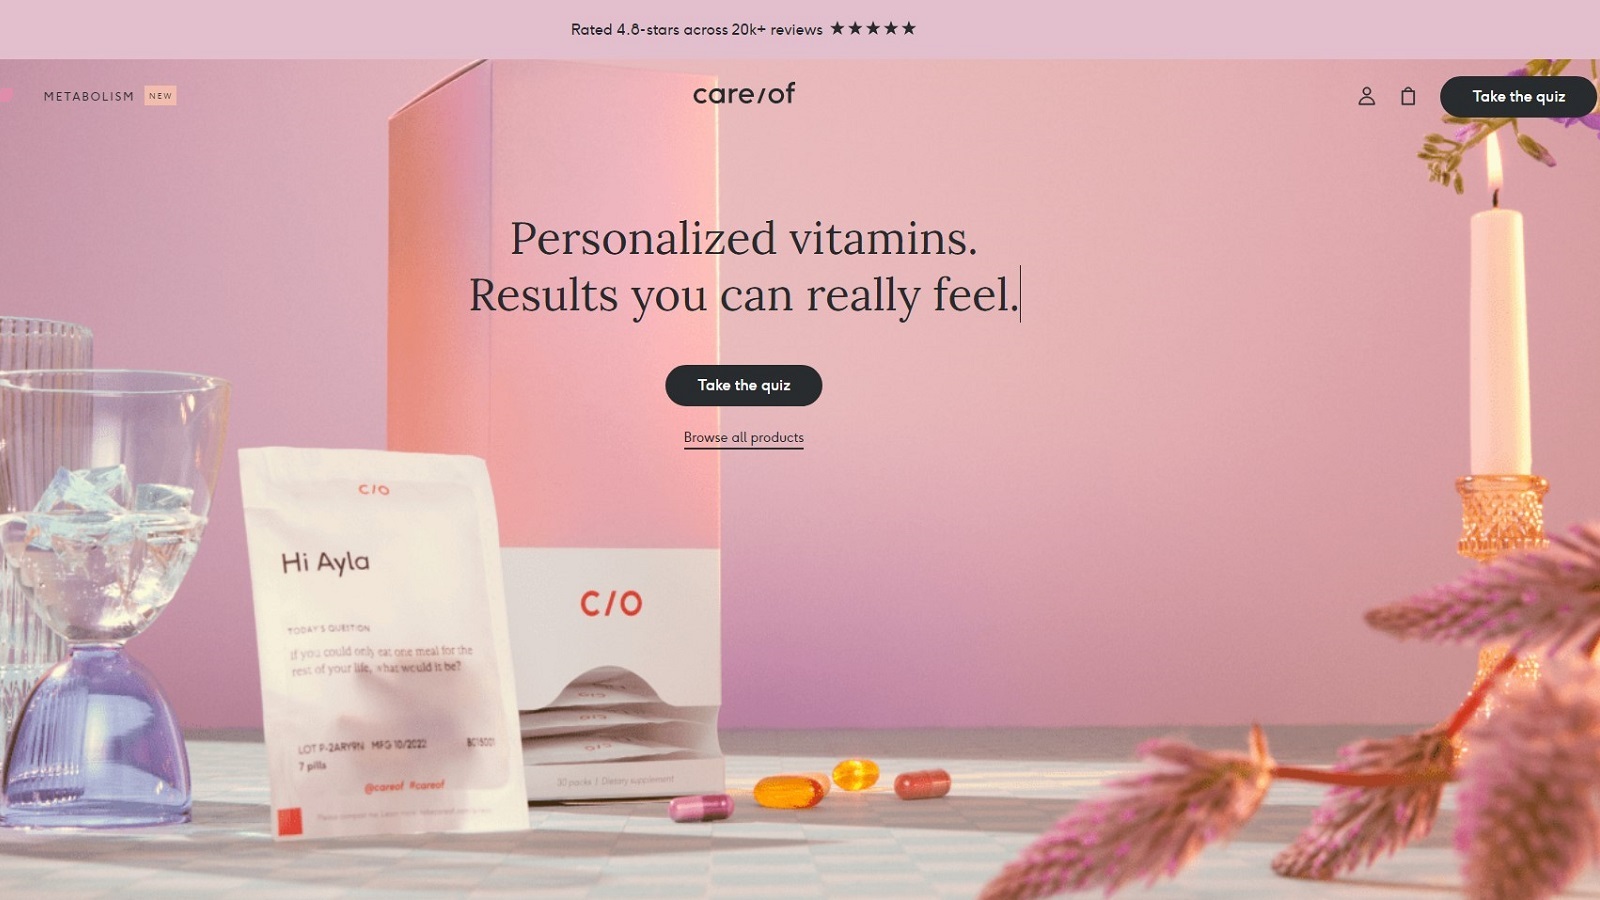 Care/of Vitamins Review: Is the Personalized Daily Vitamin Right for You?